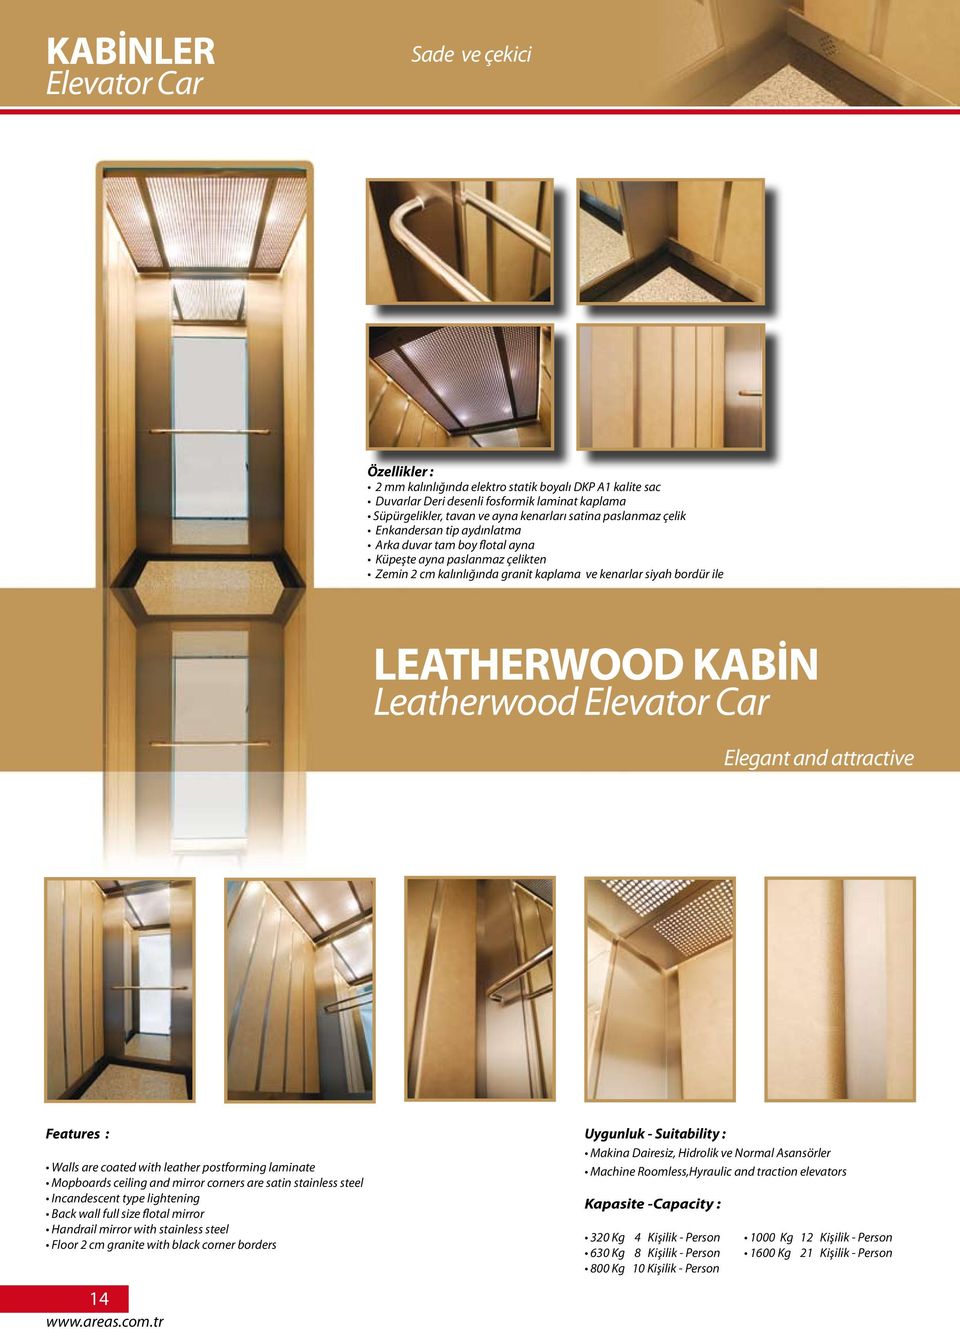 Leatherwood Elevator Car Elegant and attractive Features : Walls are coated with leather postforming laminate Mopboards ceiling and mirror corners are satin stainless steel Incandescent type